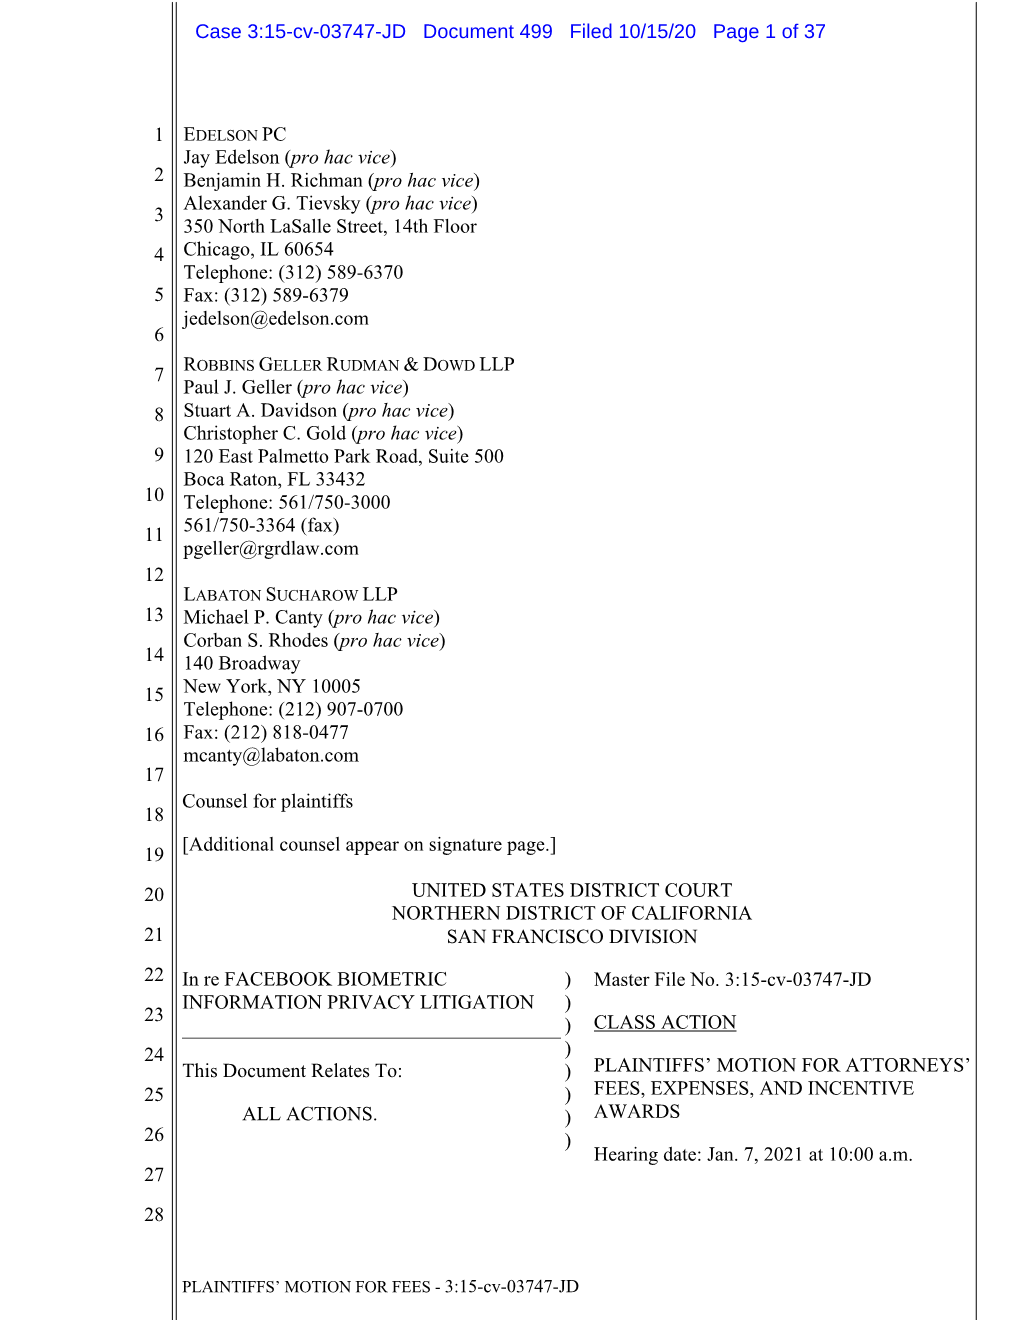 Case 3:15-Cv-03747-JD Document 499 Filed 10/15/20 Page 1 of 37